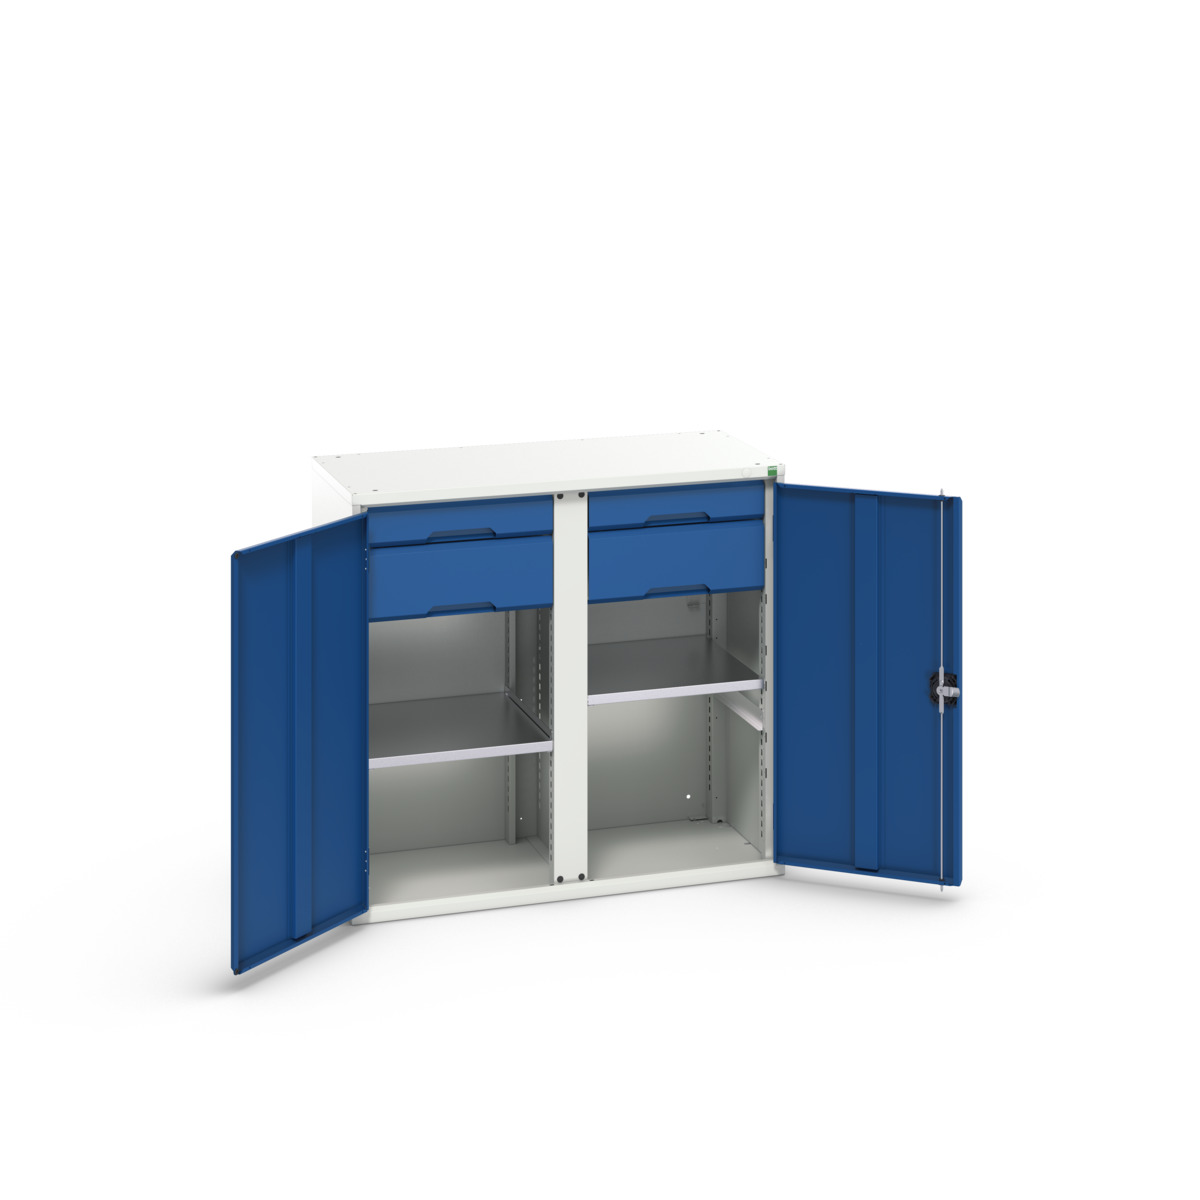 16926556.11 - verso kitted cupboard